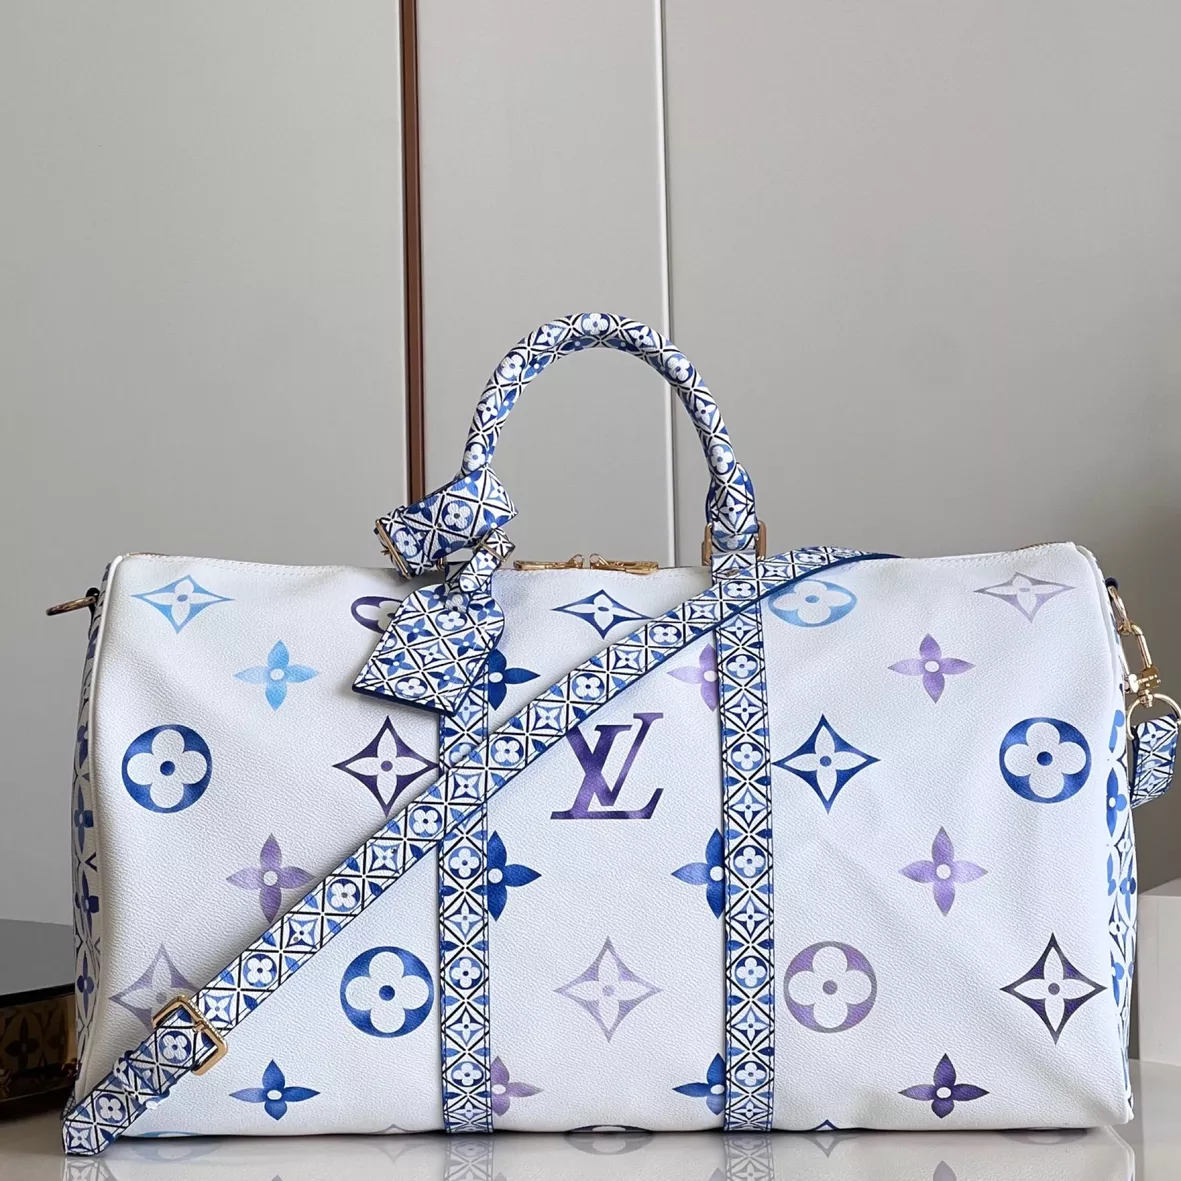 The shoulder bag Louis Vuitton worn by PLK on his account